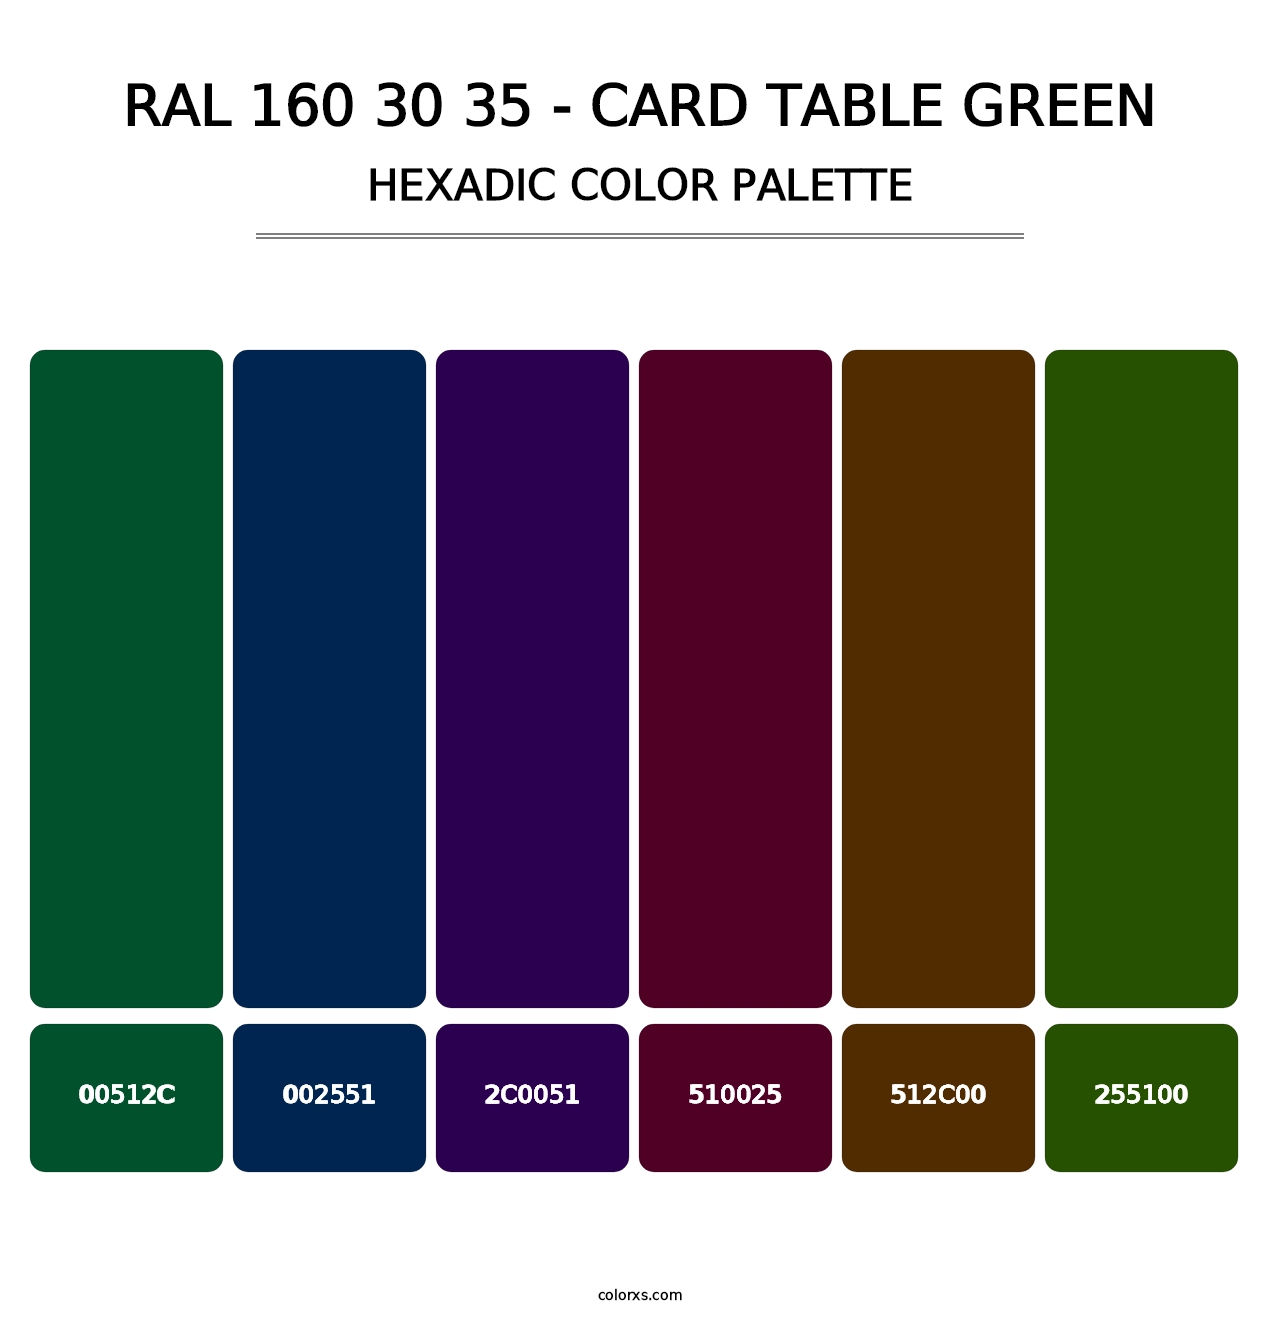 RAL 160 30 35 - Card Table Green - Hexadic Color Palette